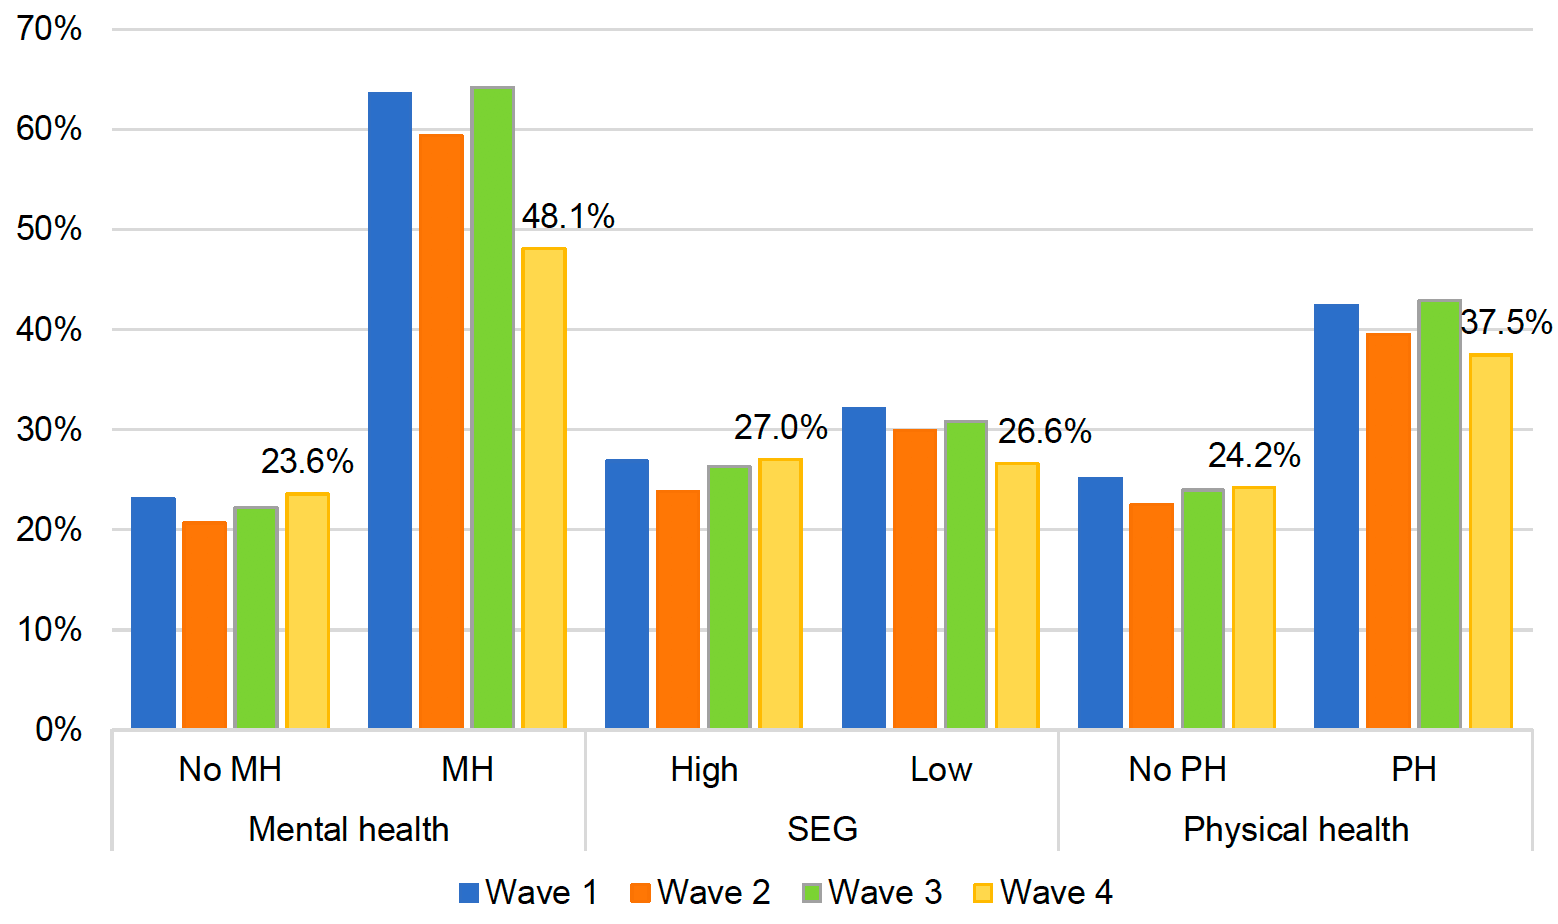 This histogram displays the percentage of high GHQ-12 scores in all four waves. The findings are presented separately for those who did or did not report a pre-existing mental health conditions, participants of the high or low socio-economic group and those who reported or did not report a pre-existing physical health condition. The highest rates for high GHQ-12 scores were found for participants with a pre-existing mental health condition, reporting 63.6% at Wave 1, 59.4% at Wave 2, 64.2% at Wave 3 but only 48.1% at Wave 4, the lowest percentage within the four waves in this group. Participants with a pre-existing physical health condition showed 42.4% high GHQ-12 scores at Wave 1, 39.5% at Wave 2, 42.9% at Wave 3 and 37.5% at Wave 4. The next highest rates were found for participants from the low socio-economic group; in Wave 1, 32.1% high GHQ-12 scores were identified, 29.9% at Wave 2, 30.8% at Wave 3 and 26.6% at Wave 4. For participants from the high socio-economic group the rates ranged from 23.8% at Wave 2 to 27.0% at Wave 4; Wave 1 participants reported 26.9% high GHQ-12 scores and Wave 3 participants 26.3%. Within the last two groups, rates did only differ slightly. Participants without a pre-existing physical health condition showed 25.1% high GHQ-12 scores at Wave 1, 22.5% at Wave 2, 24.0% at Wave 3 and 24.2% at Wave 4. Participants without a pre-existing mental health condition showed 23.1% high scores at Wave 1, 20.7% at Wave 2, 22.2% at Wave 3 and 23.6% at Wave 4. 